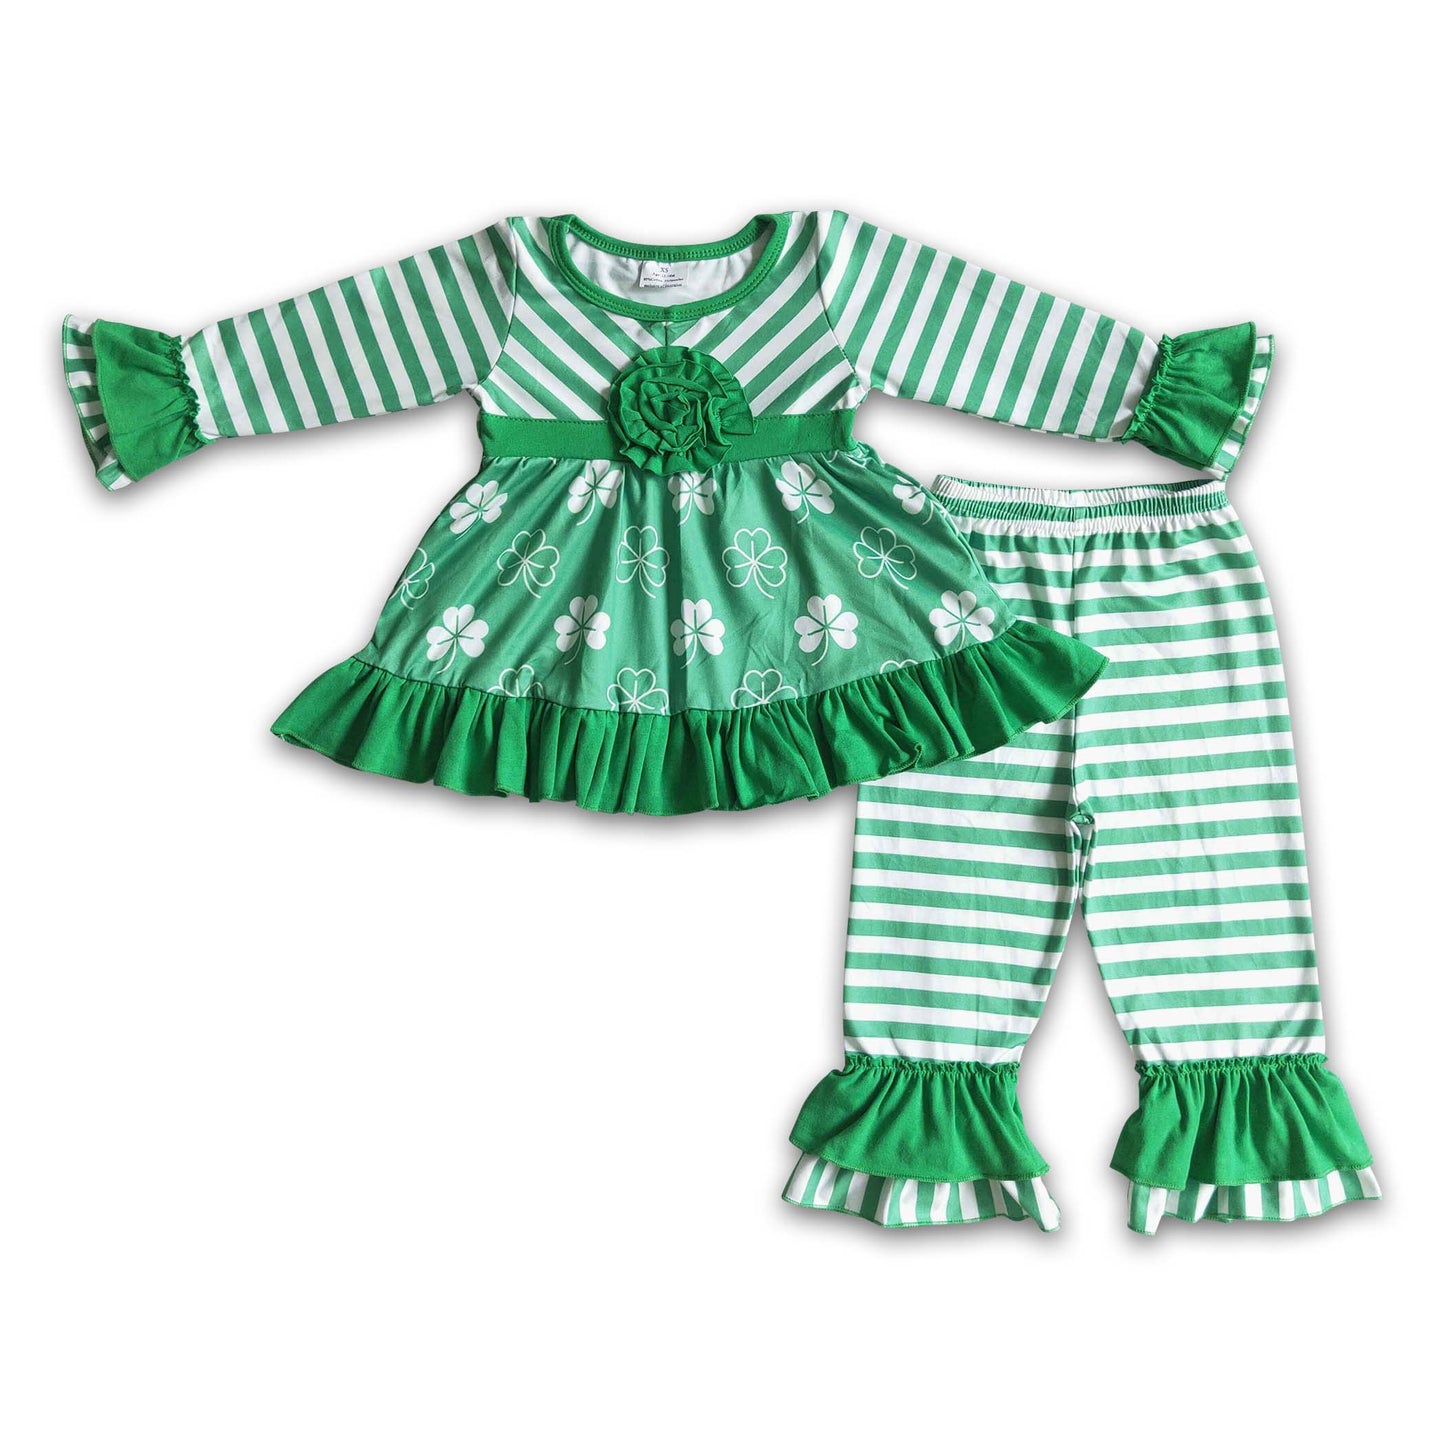 Clover tunic green stripe pants girls St Patrick's Day clothes